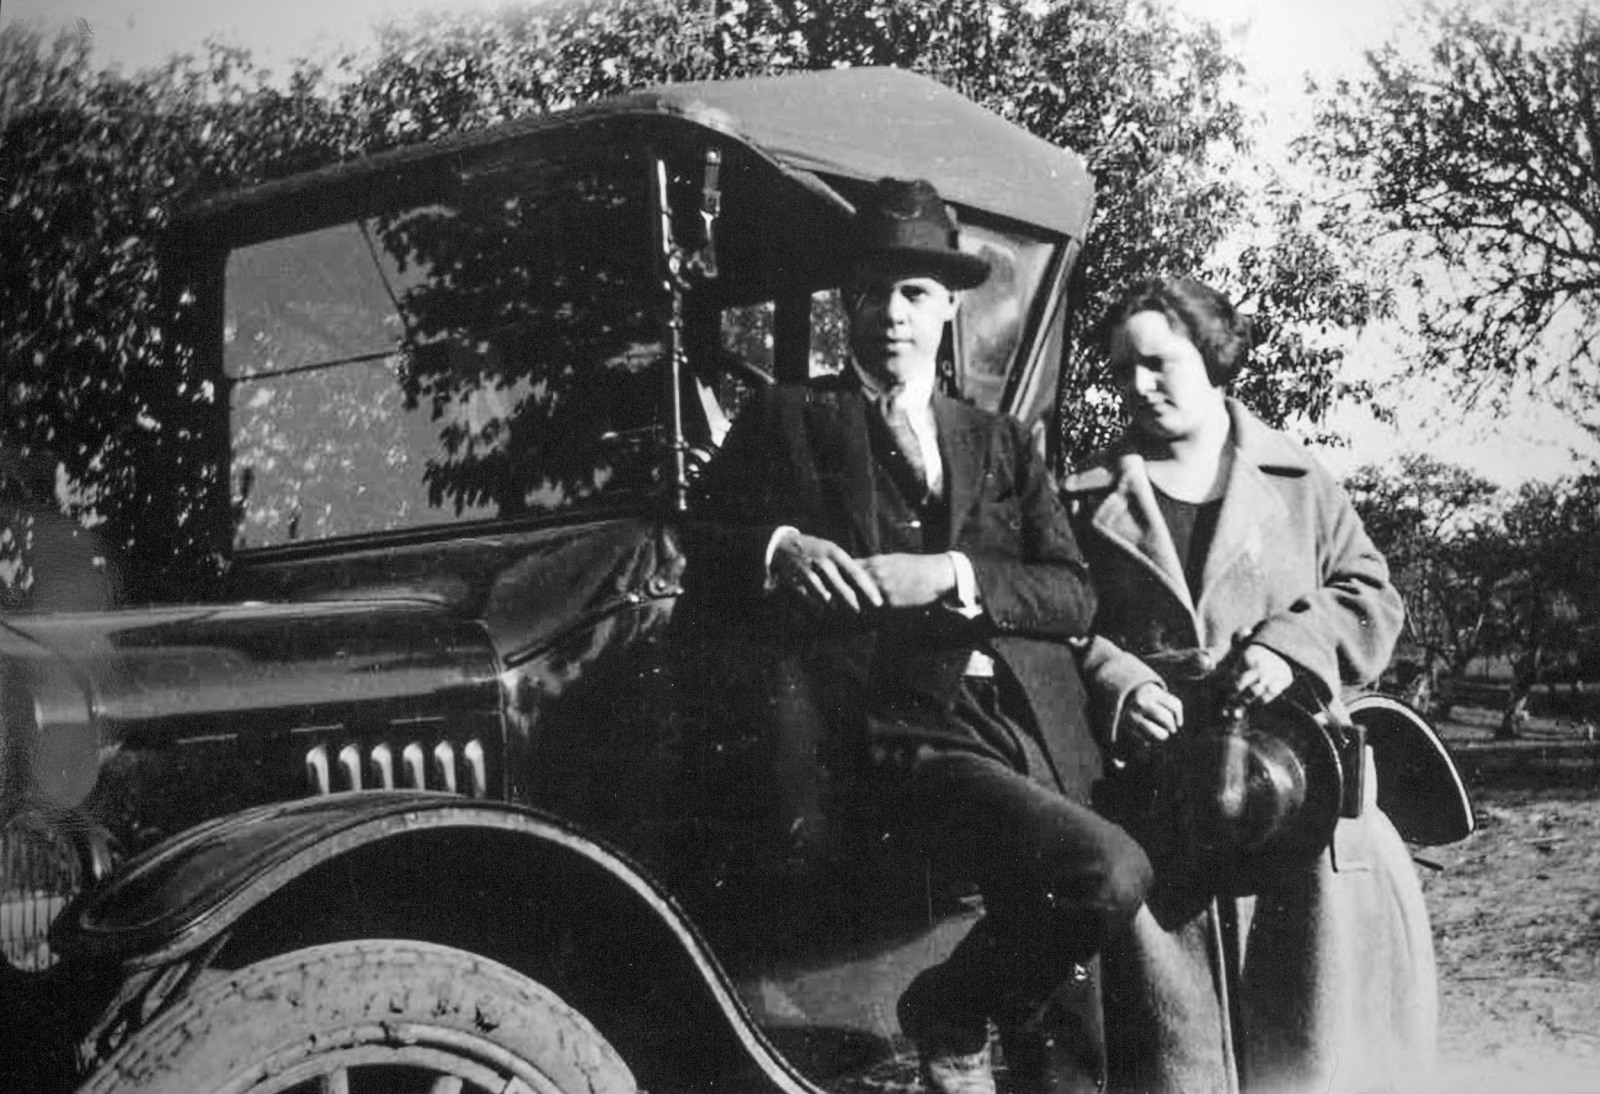 A black and white photograph of Robert Clark's parents Earl and Carmen standing in front of their Model-T Ford